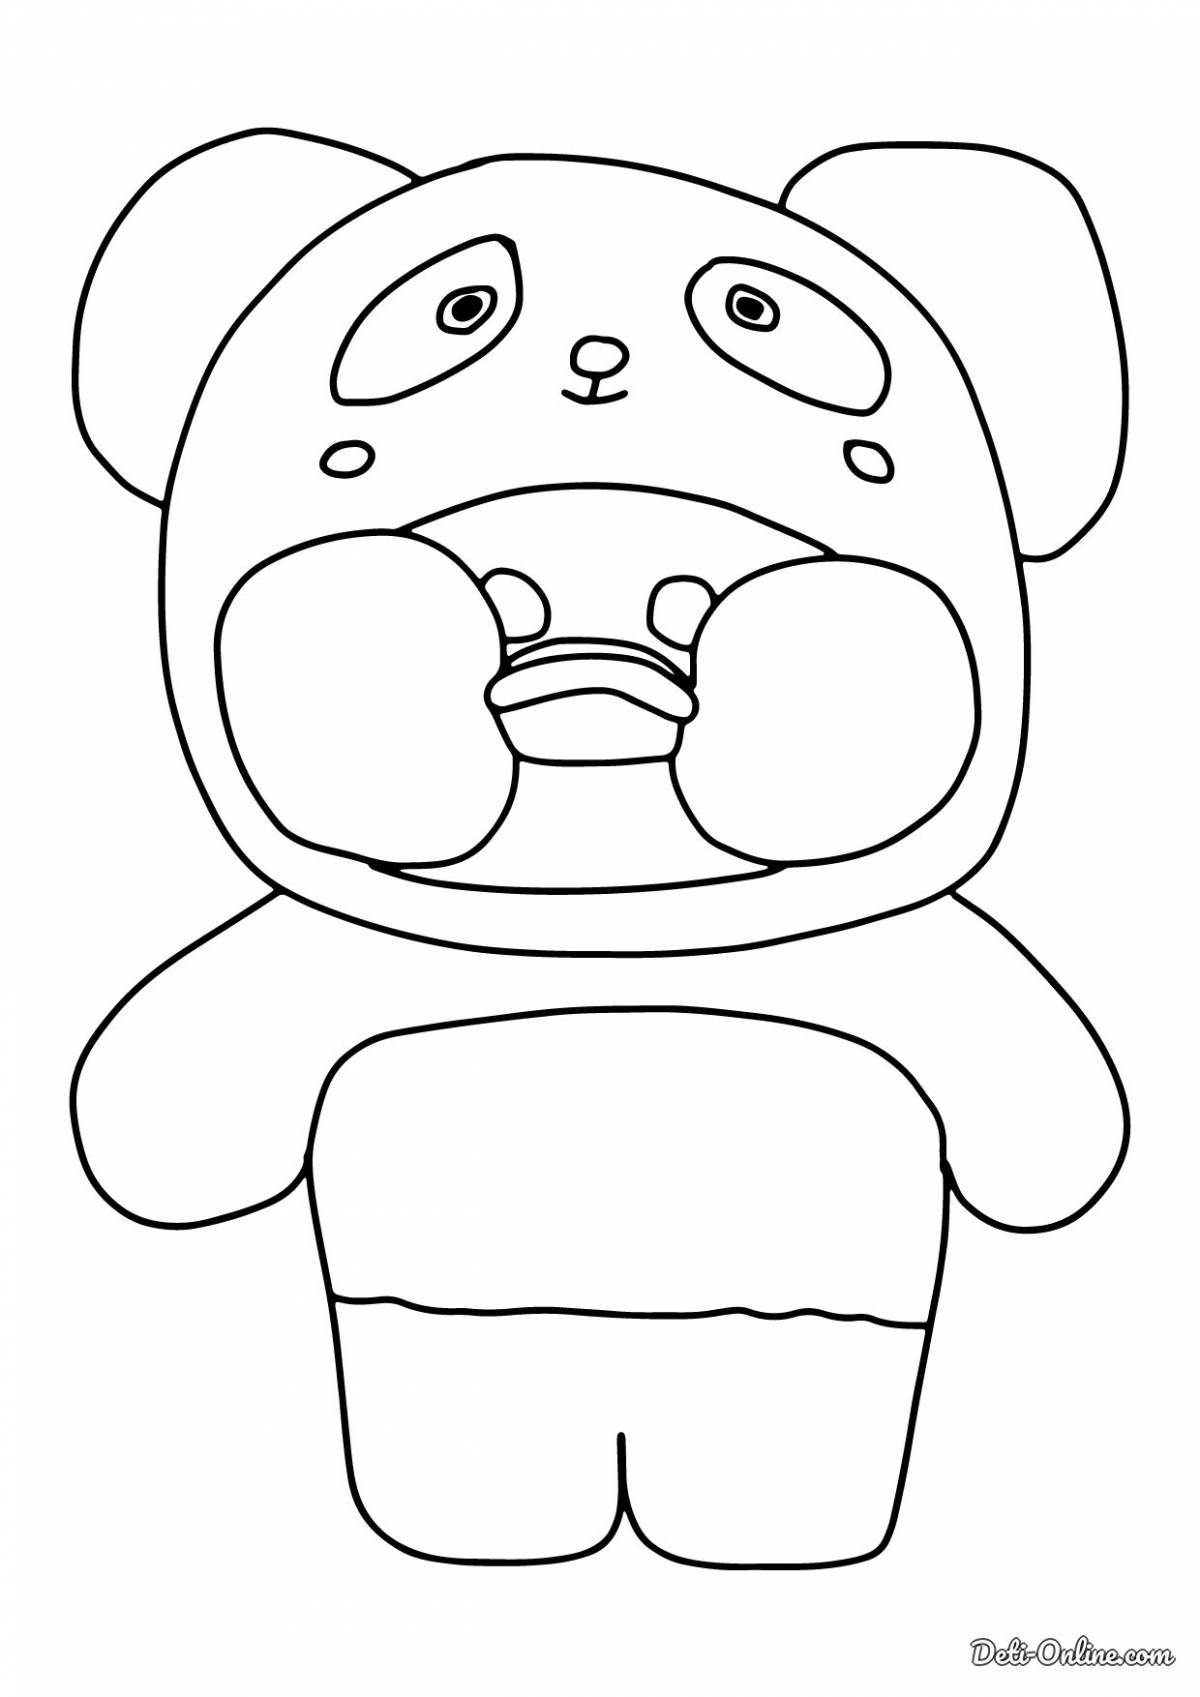 Lalafanfan dazzling duck coloring page